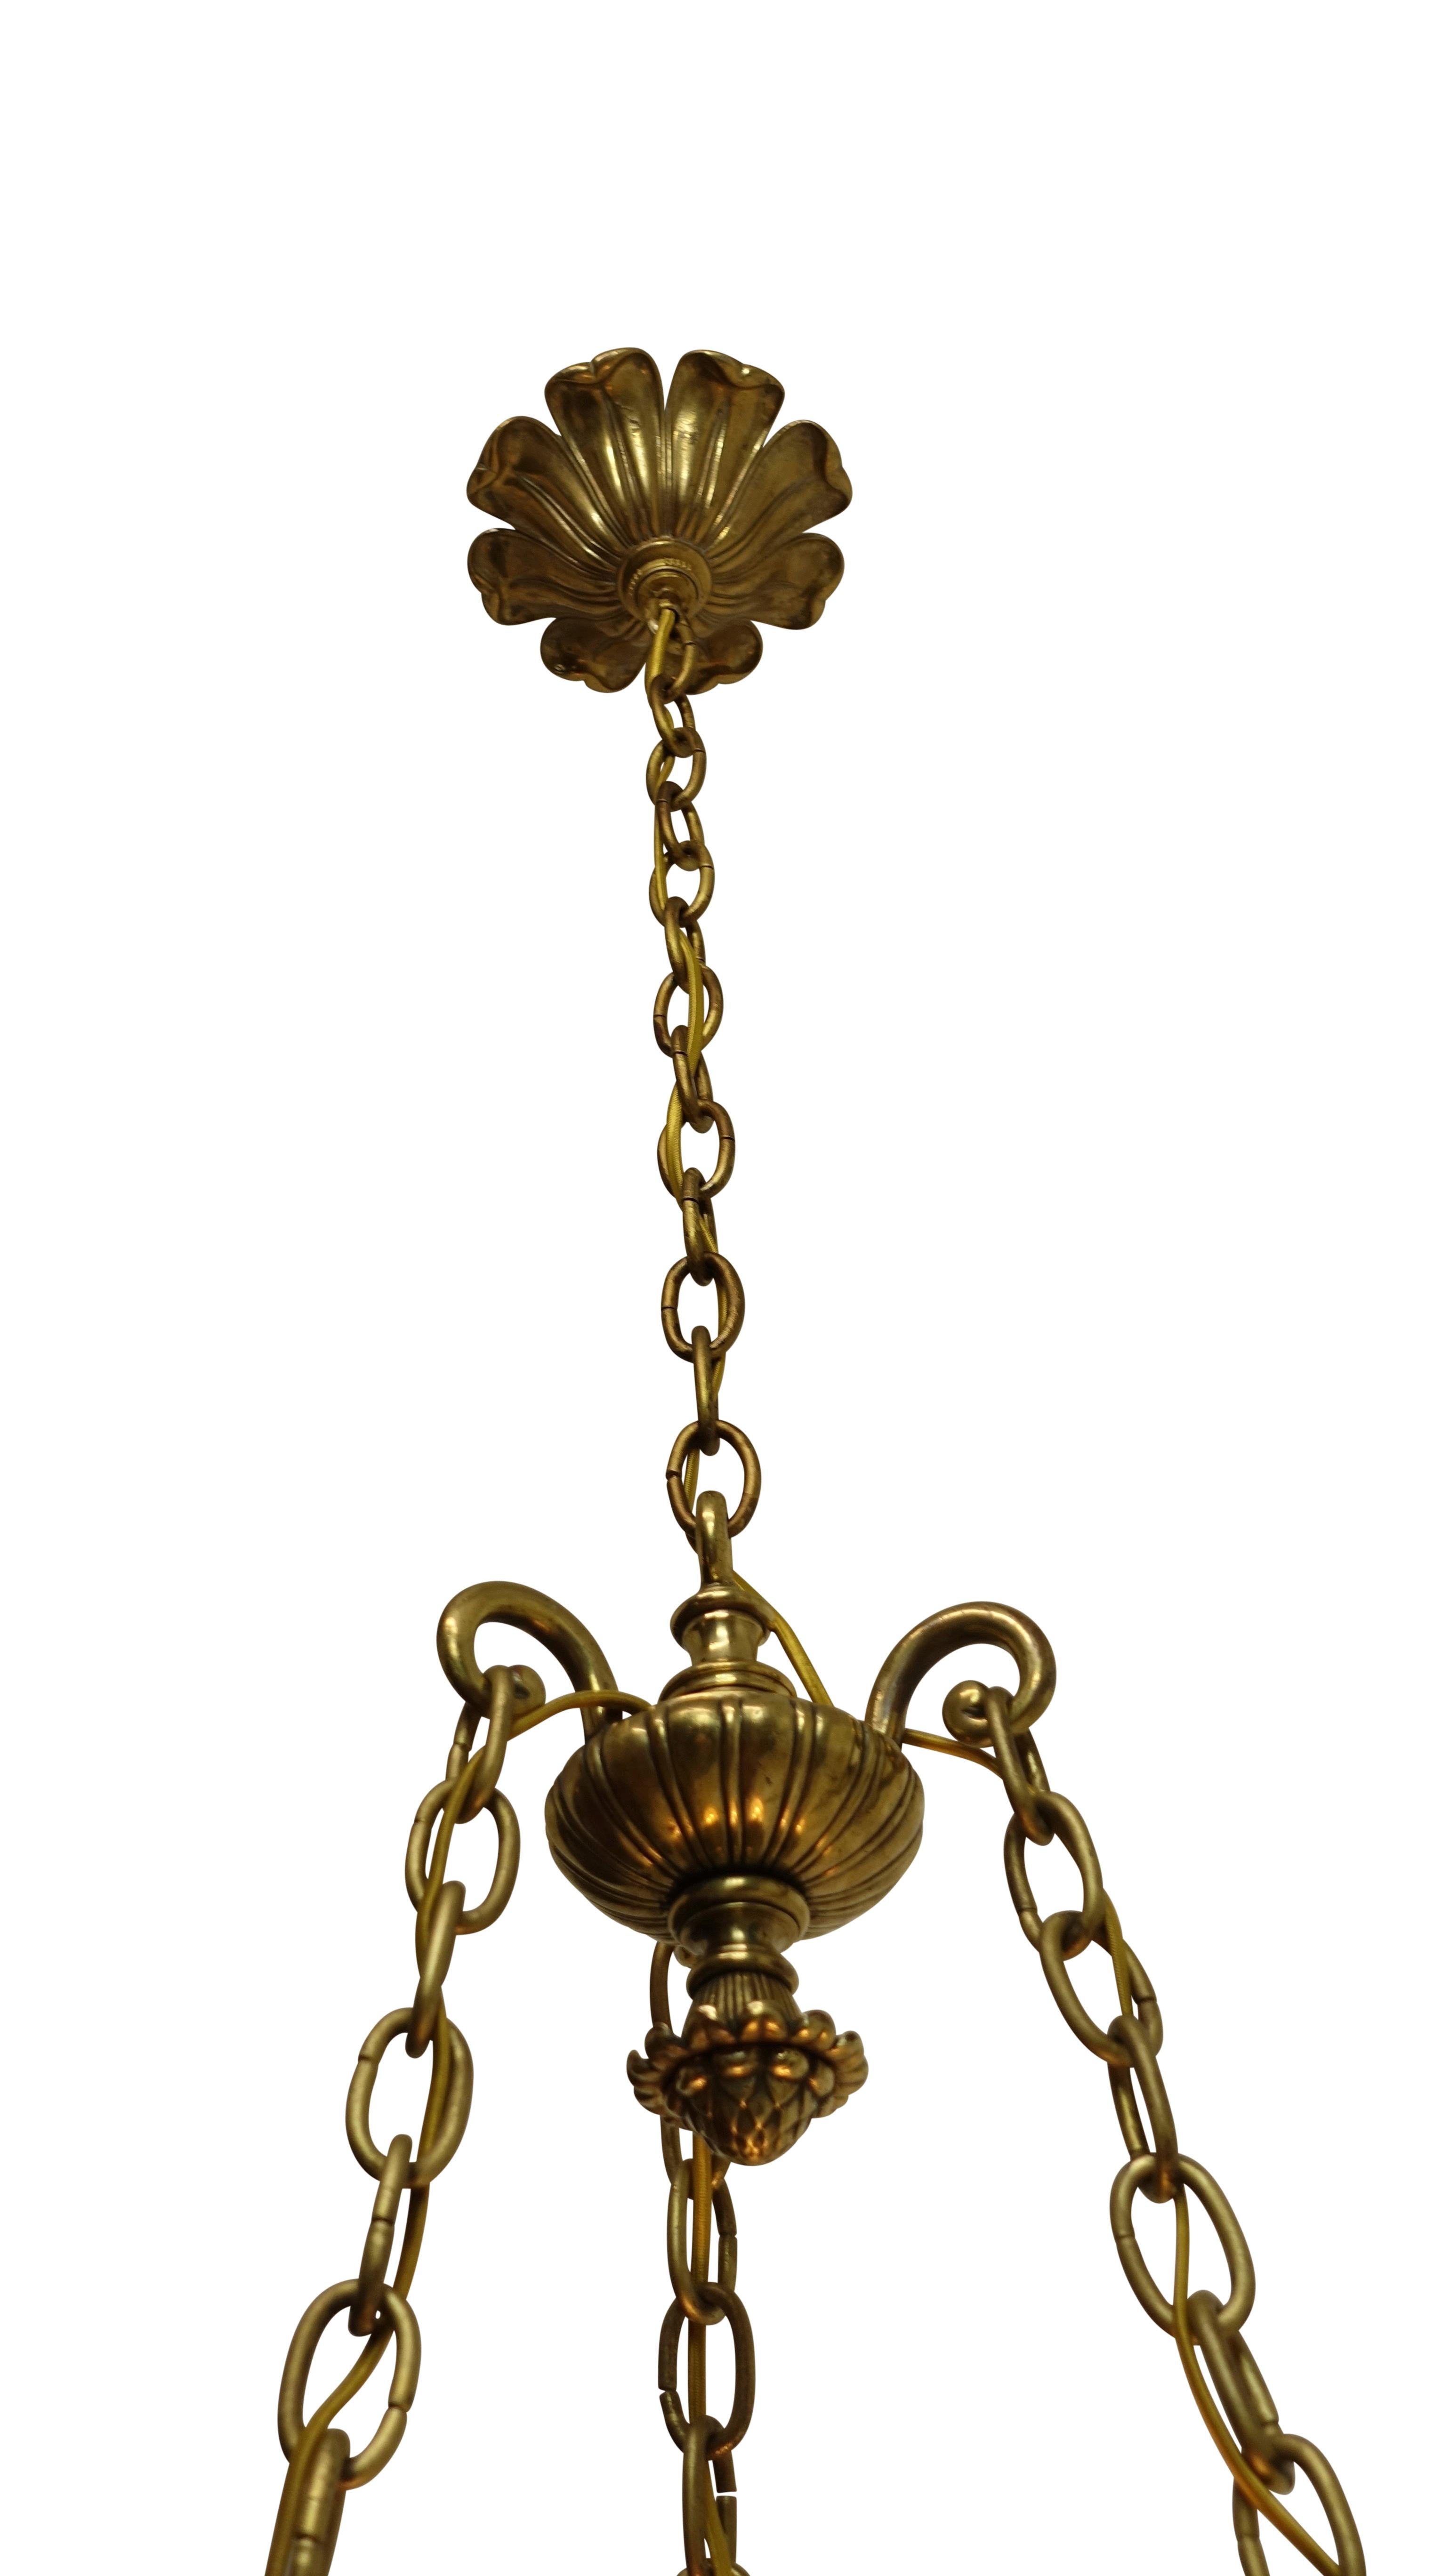 Carved Alabaster Pendant Light Fixture with Brass Hardware, Italian, circa 1910 For Sale 4